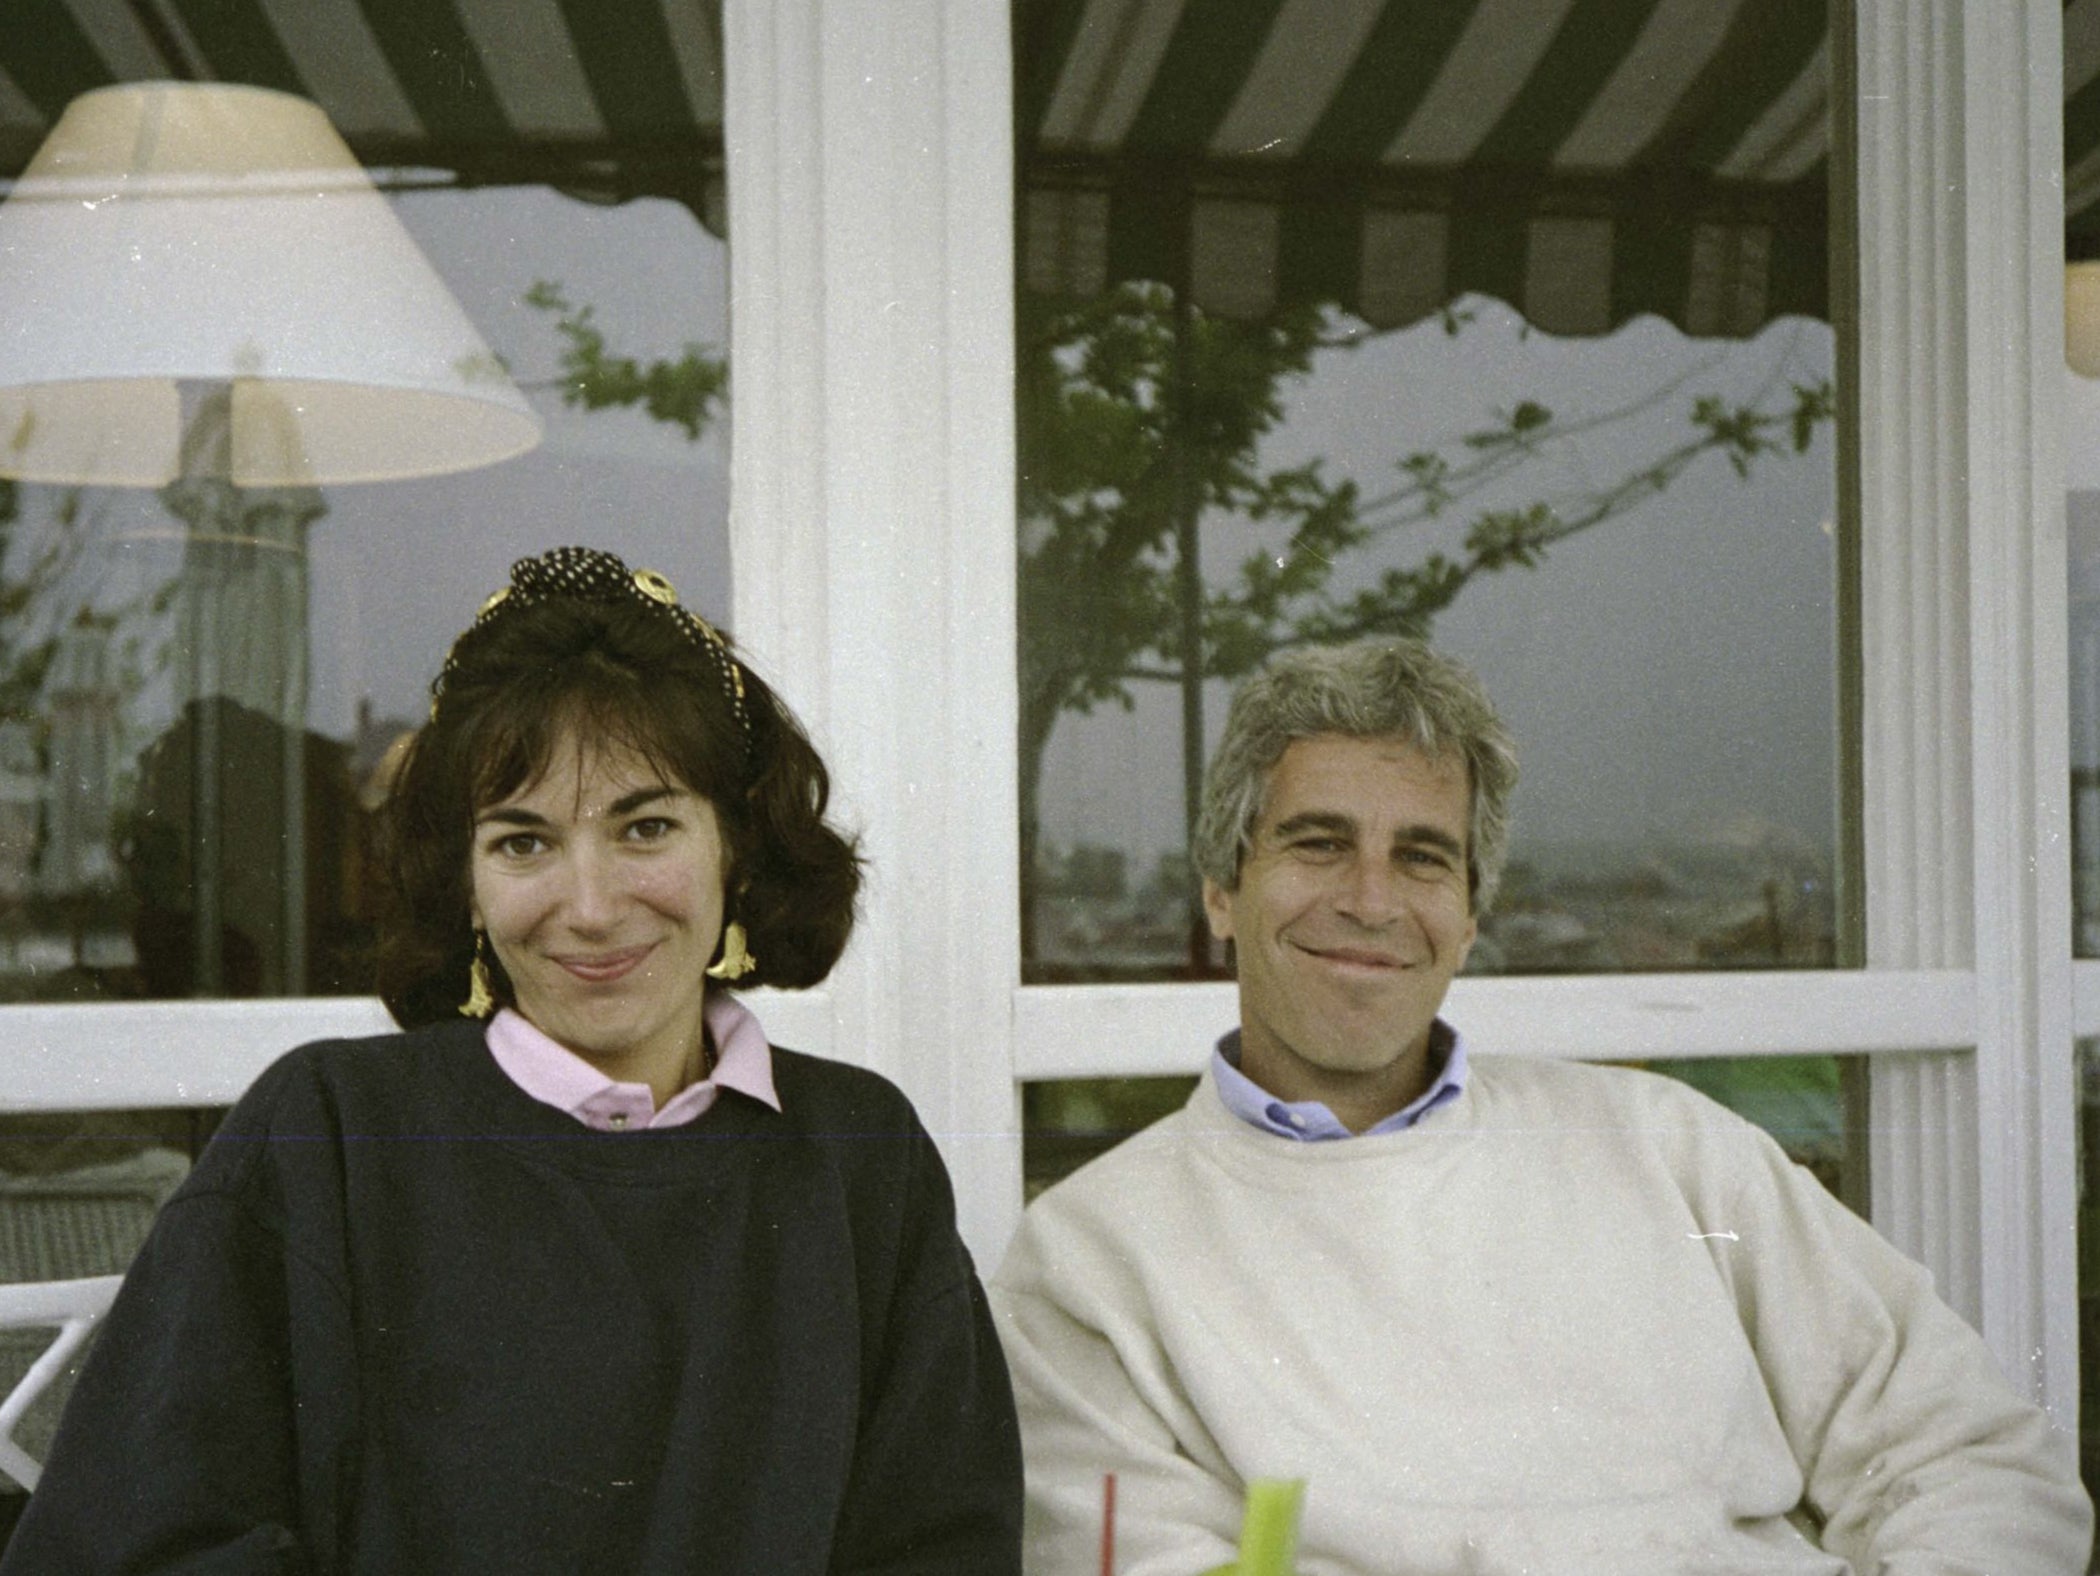 Jeffrey Epstein lived the high-life from his accumulated wealth with his ex-partner Ghislaine Maxwell